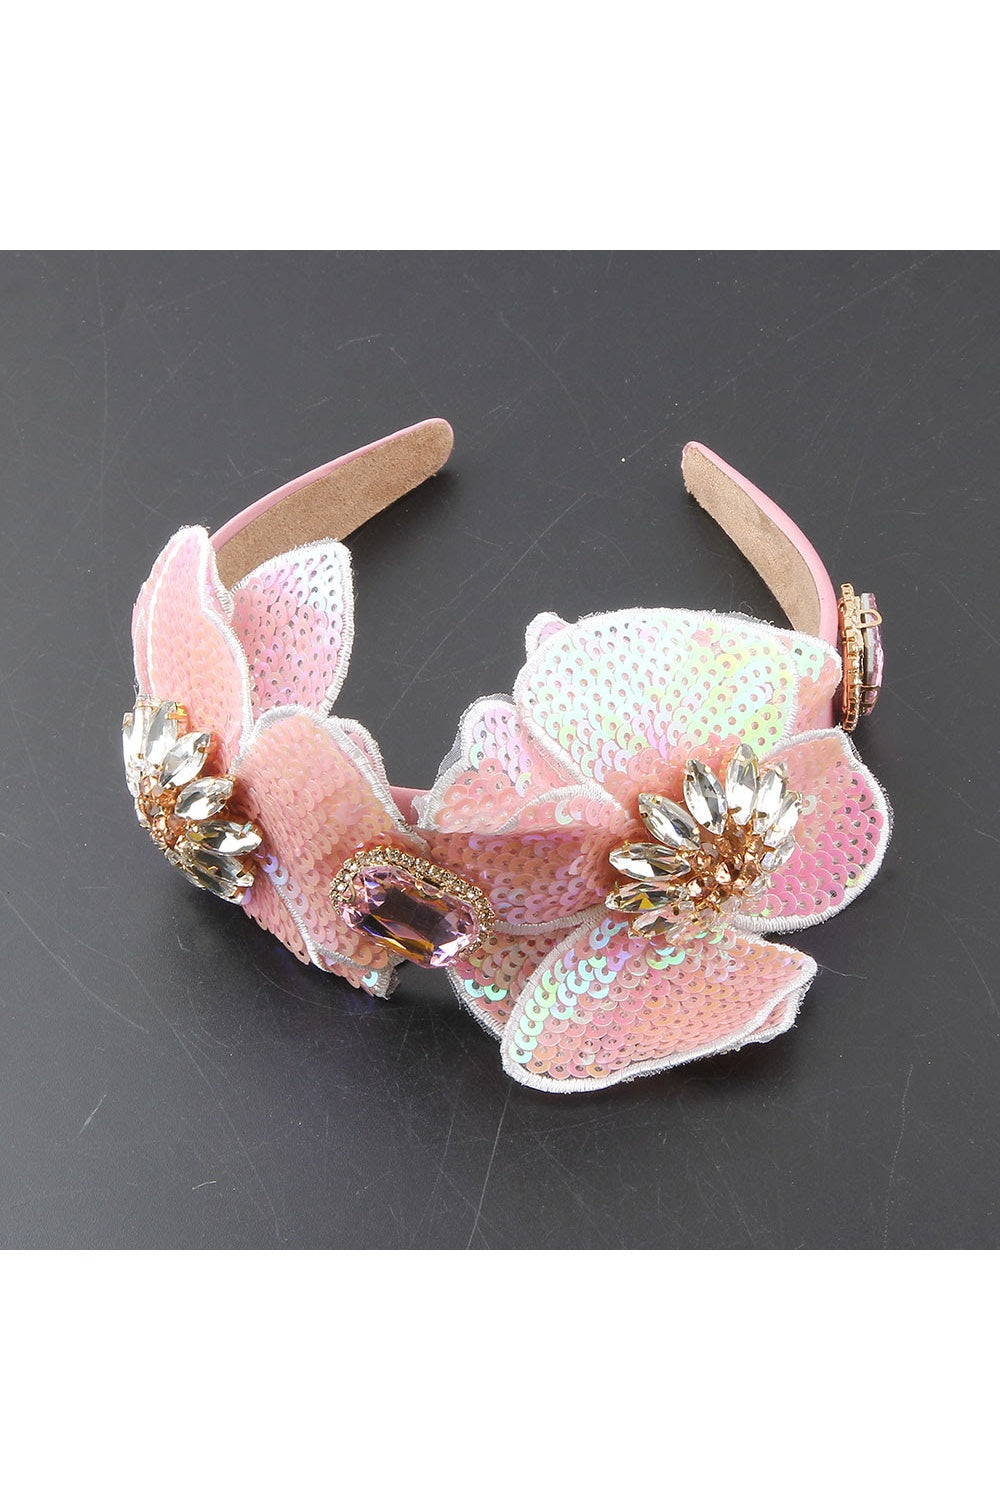 FLOWERS IN THE ATTIC HEADBAND PINK